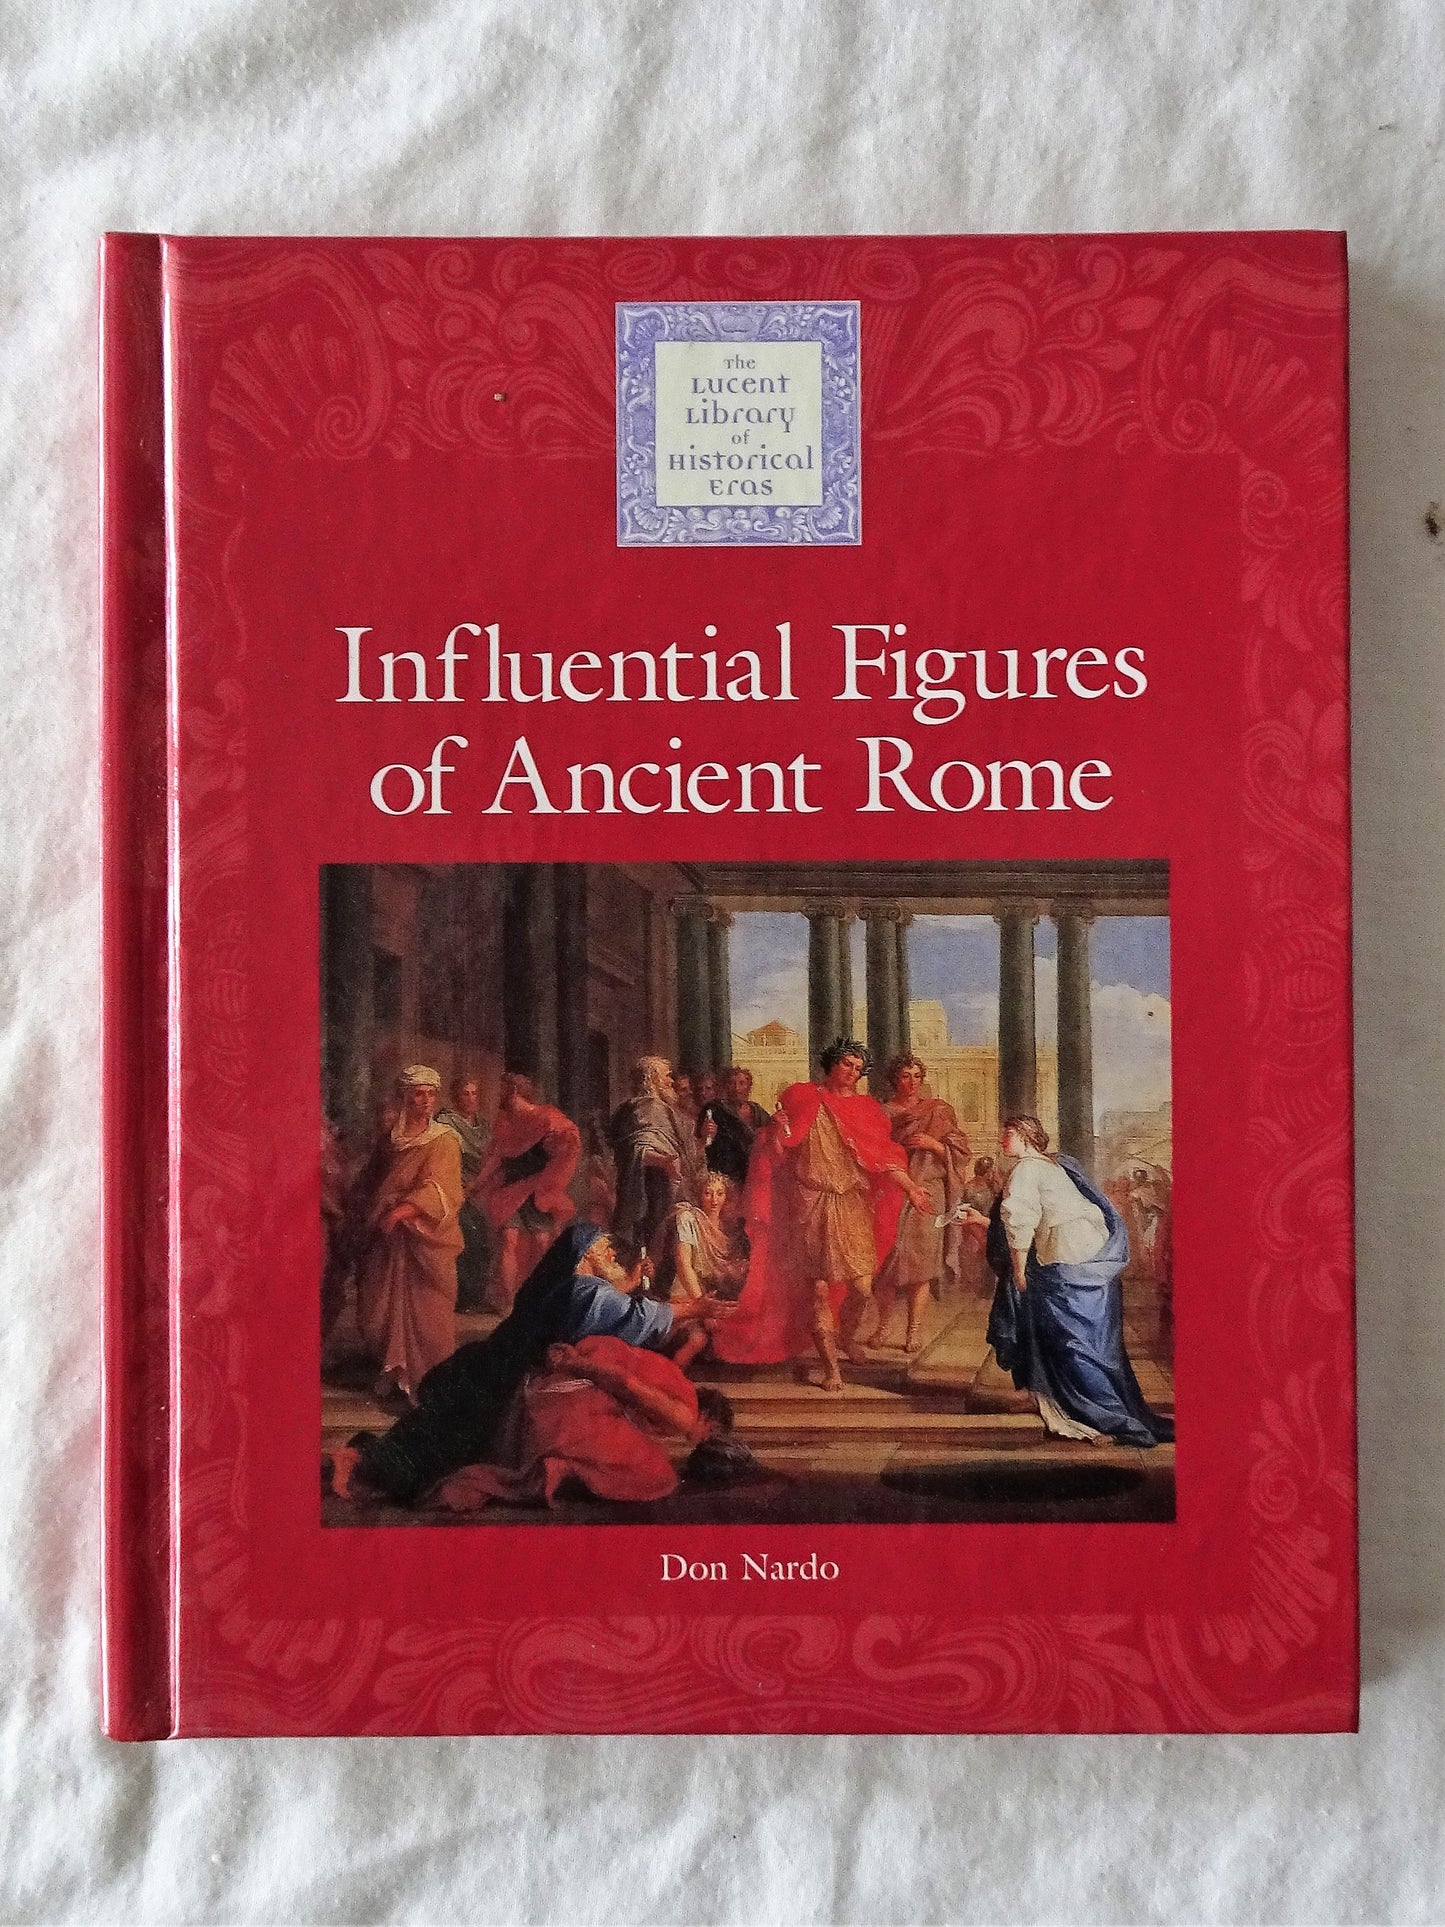 Influential Figures of Ancient Rome by Don Nardo